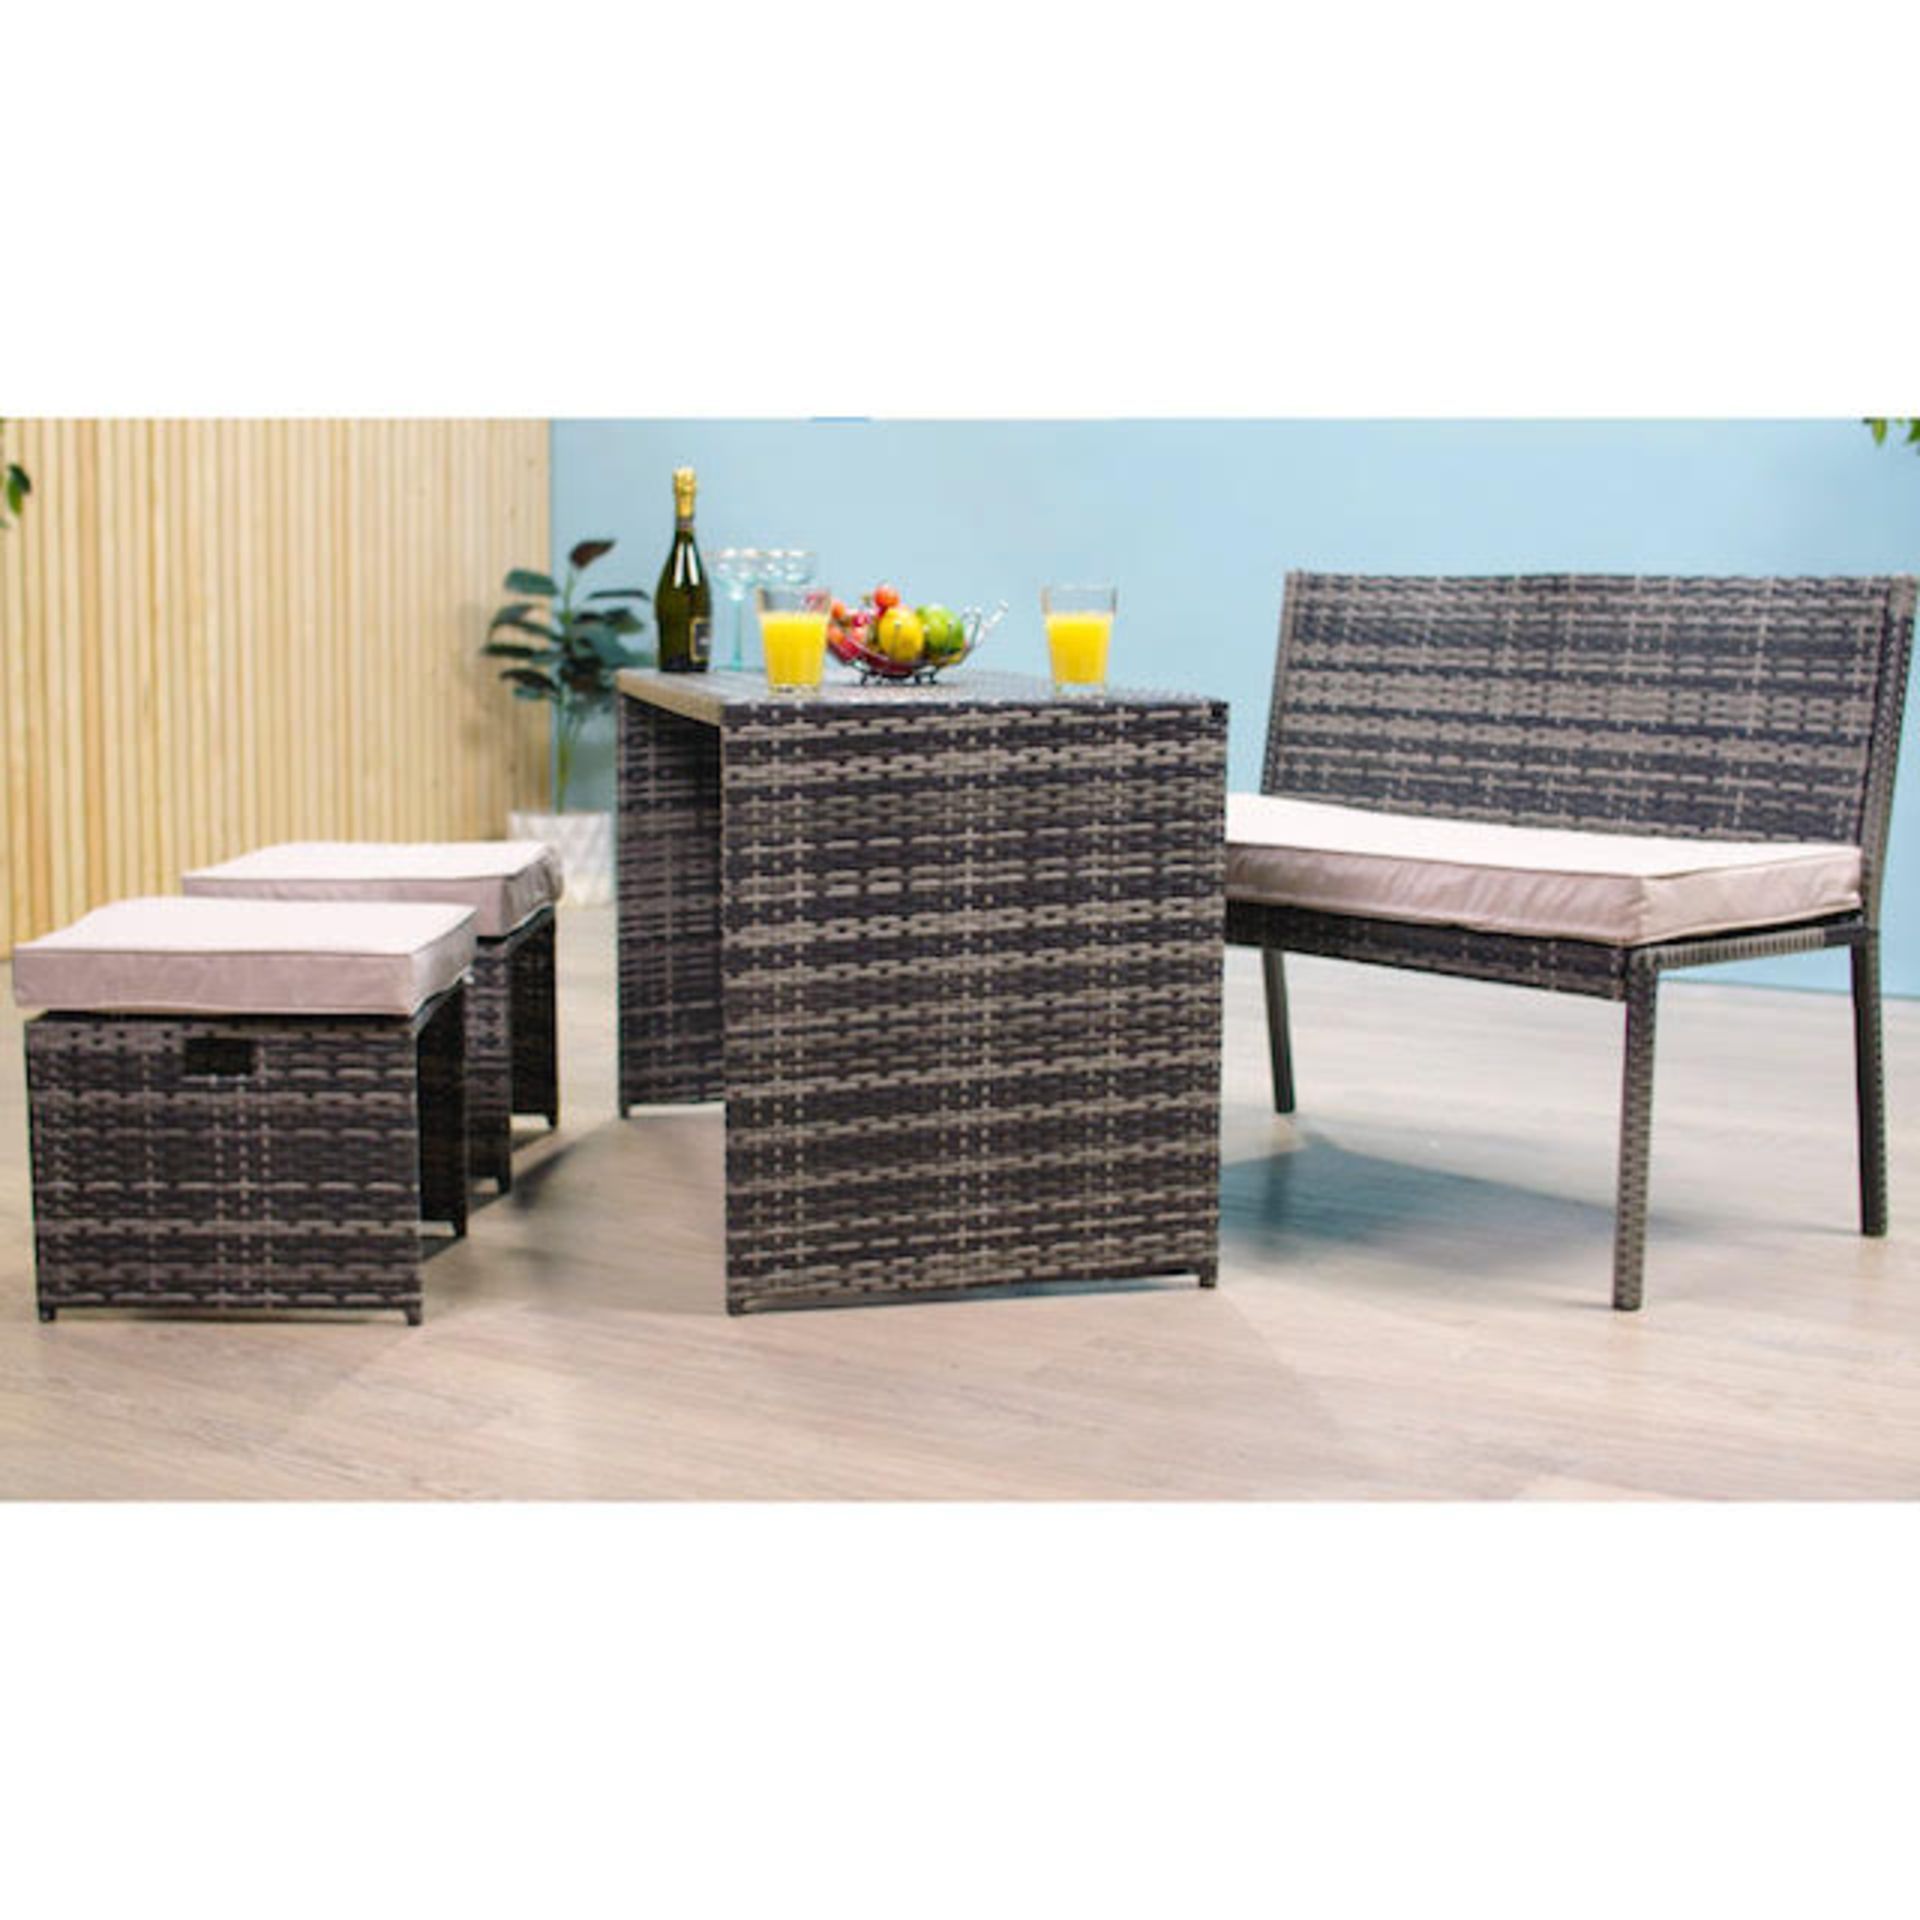 TRADE LOT 4 X BRAND NEW LINEA 4 PIECE LUXURY RATTAN SETS RRP £1099. A PROFESSIONAL WEAVE AND COMFORT